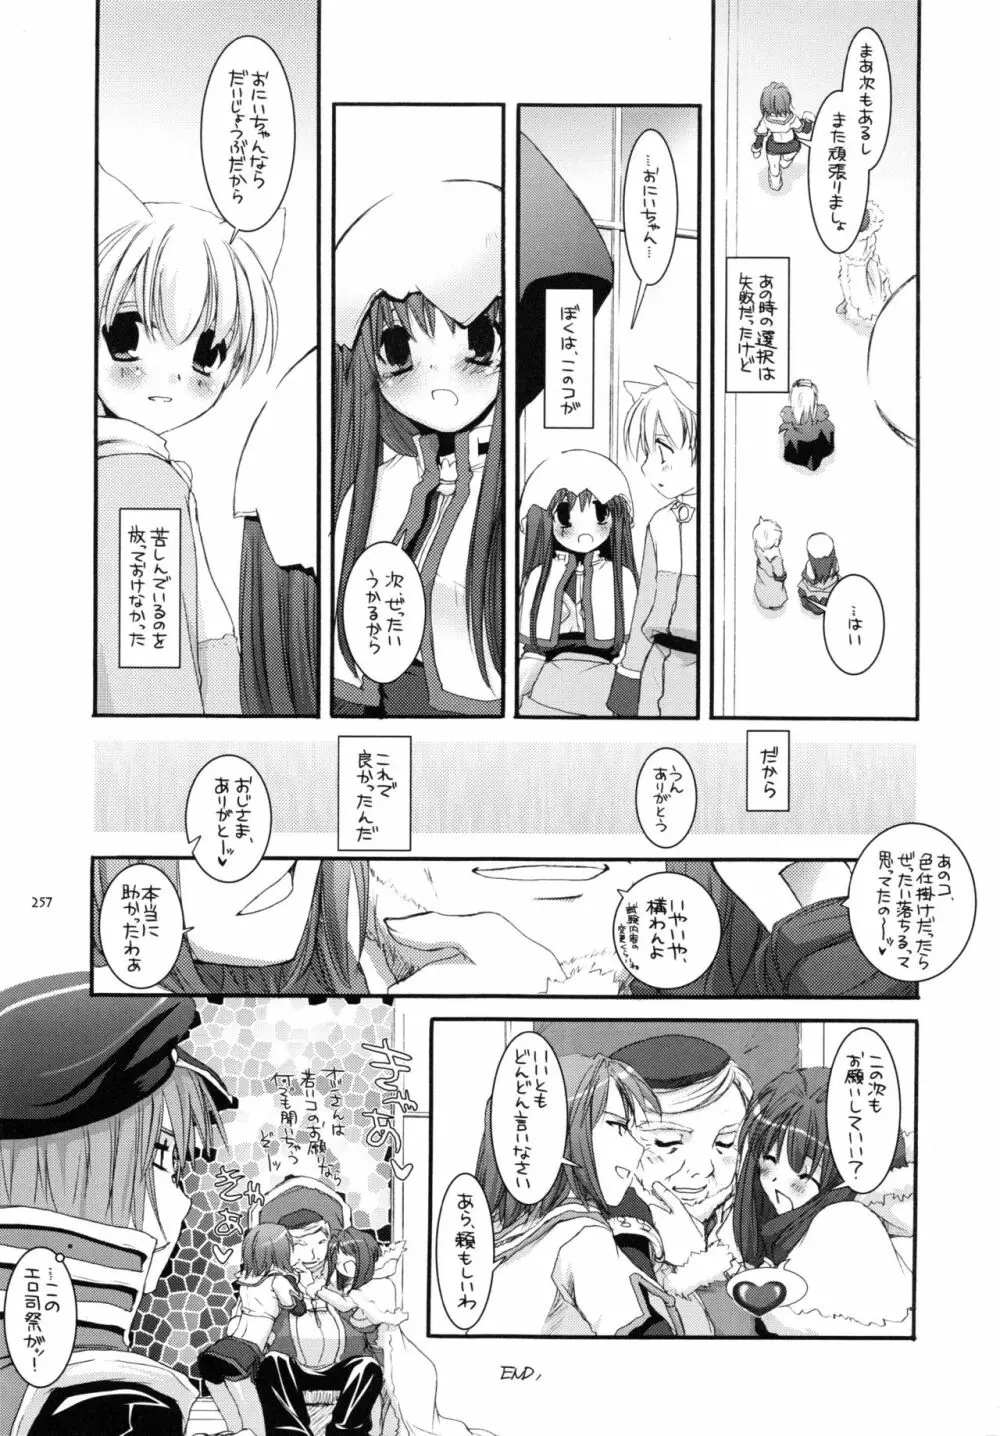 DL-RO総集編01 - page256